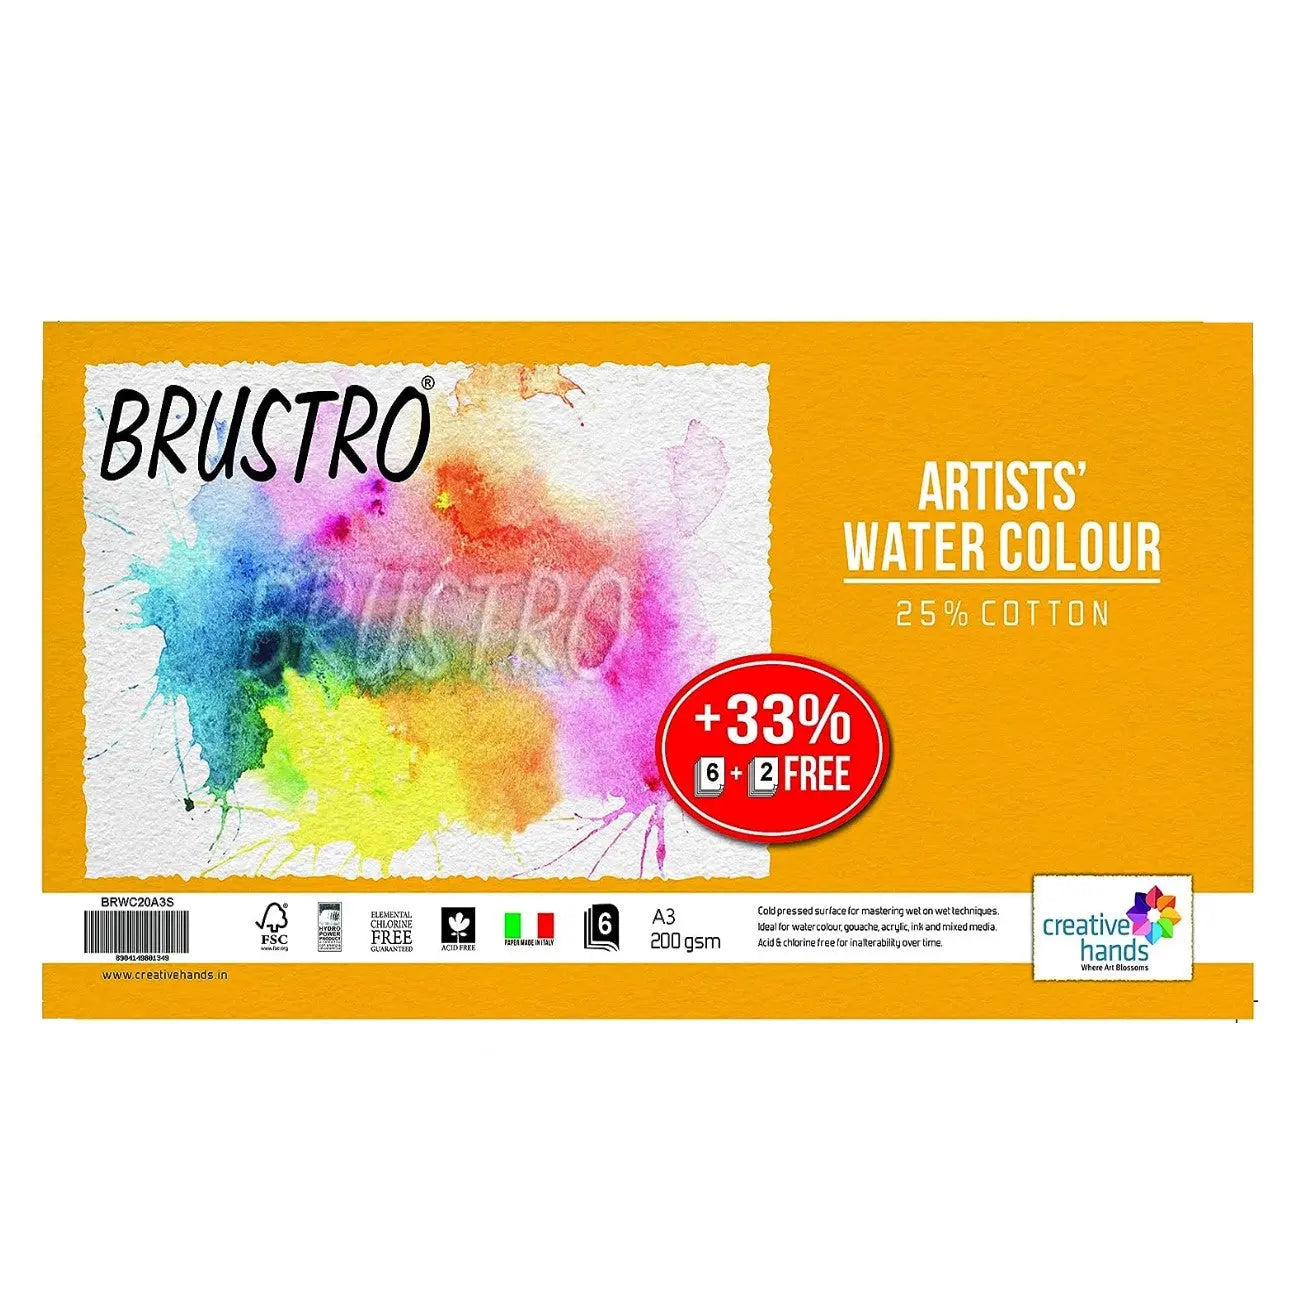 Gencrafts 100% Cotton Watercolor Paper Pad - A4 8.3X11.7In - 20 Sheets (140Lb/300Gsm) - Cold Press Acid Free Art Sketchbook Pad for Painting & Drawi